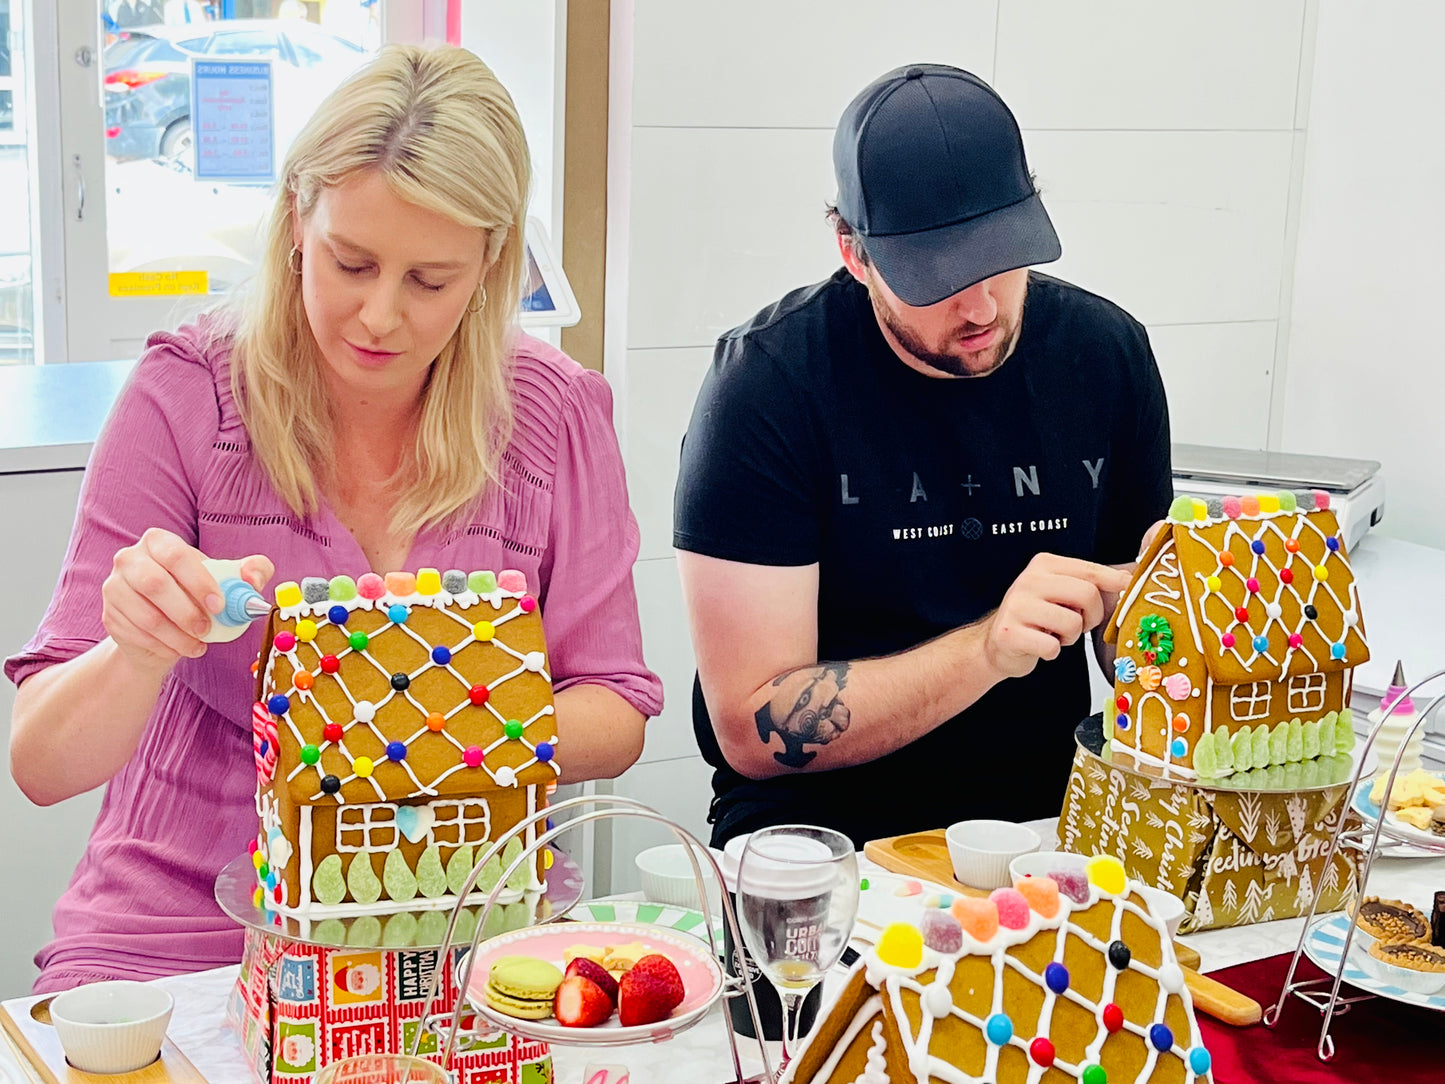 Workshops - At The Gingerbread House Bakery